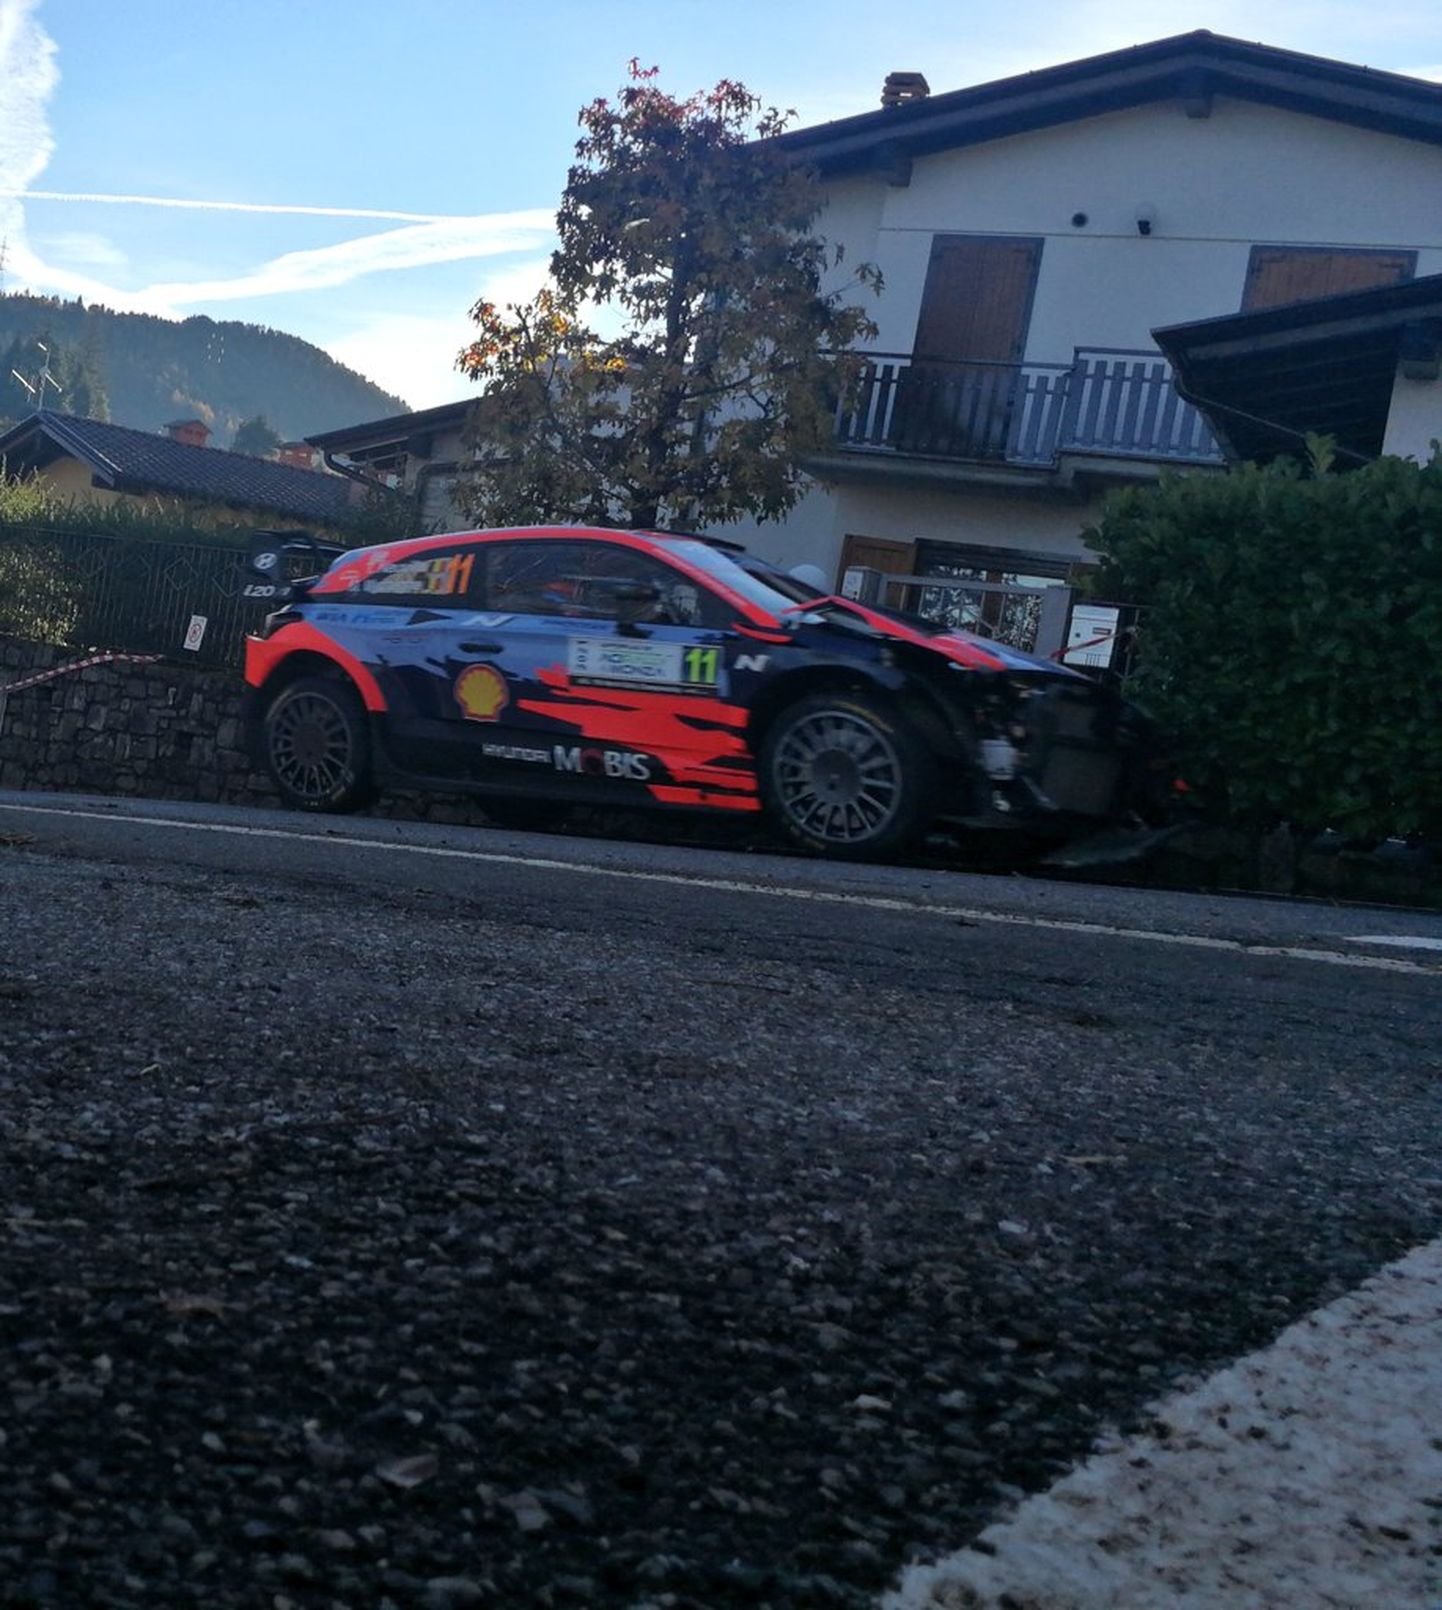 Thierry Neuville.